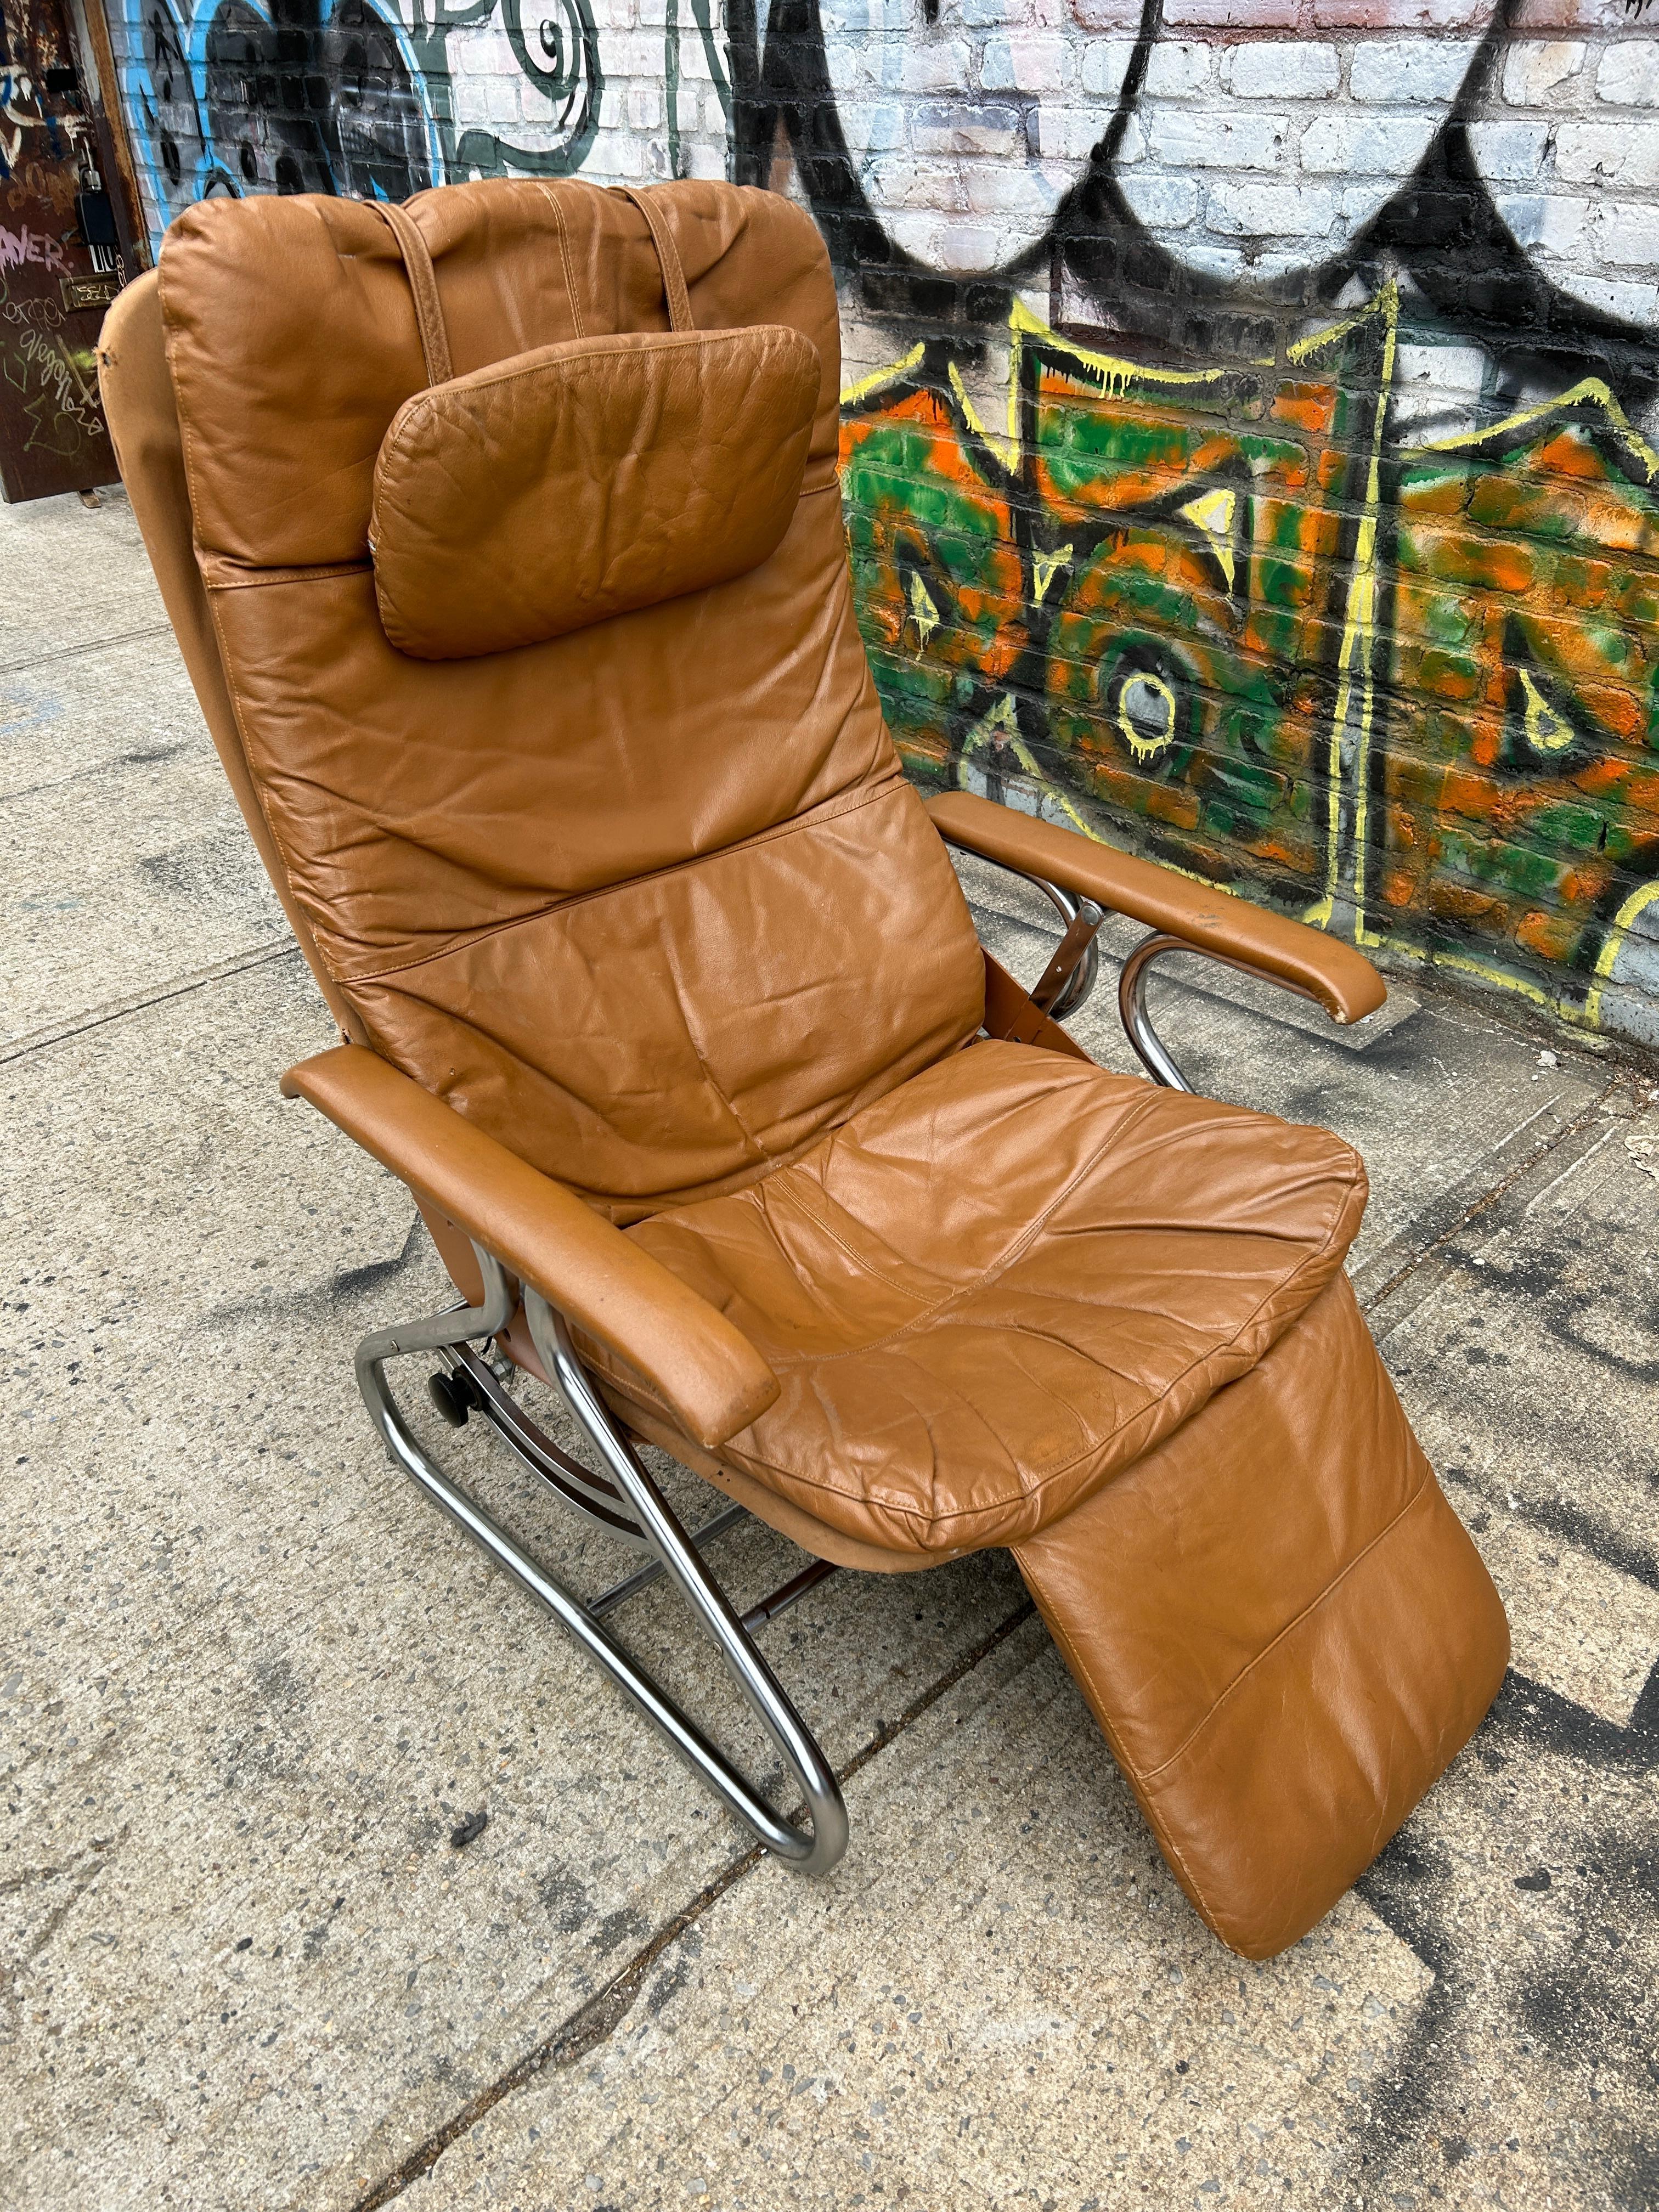 Mid-Century Modern Low Leather and Chrome full Horizontal tilt Hypnosis Lounge chair. In the Style of Westnofa. Tan Leather Upholstery with cloth backing on a chrome frame. Manually adjustable tilt with black plastic threaded knobs that lock into